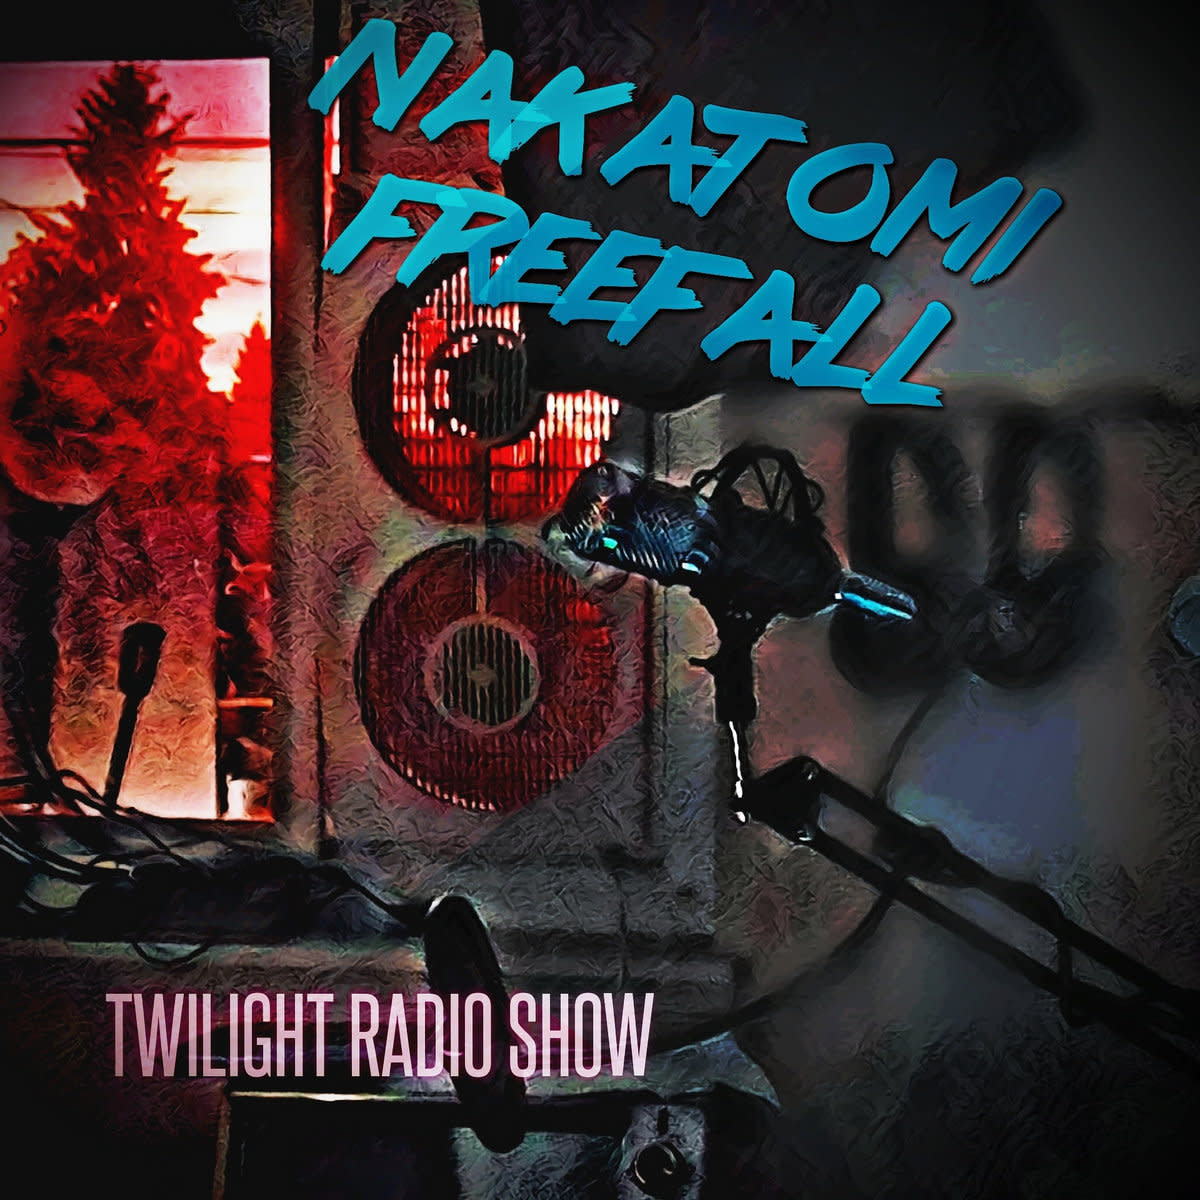 synth-album-review-twilight-radio-show-by-nakatomi-freefall